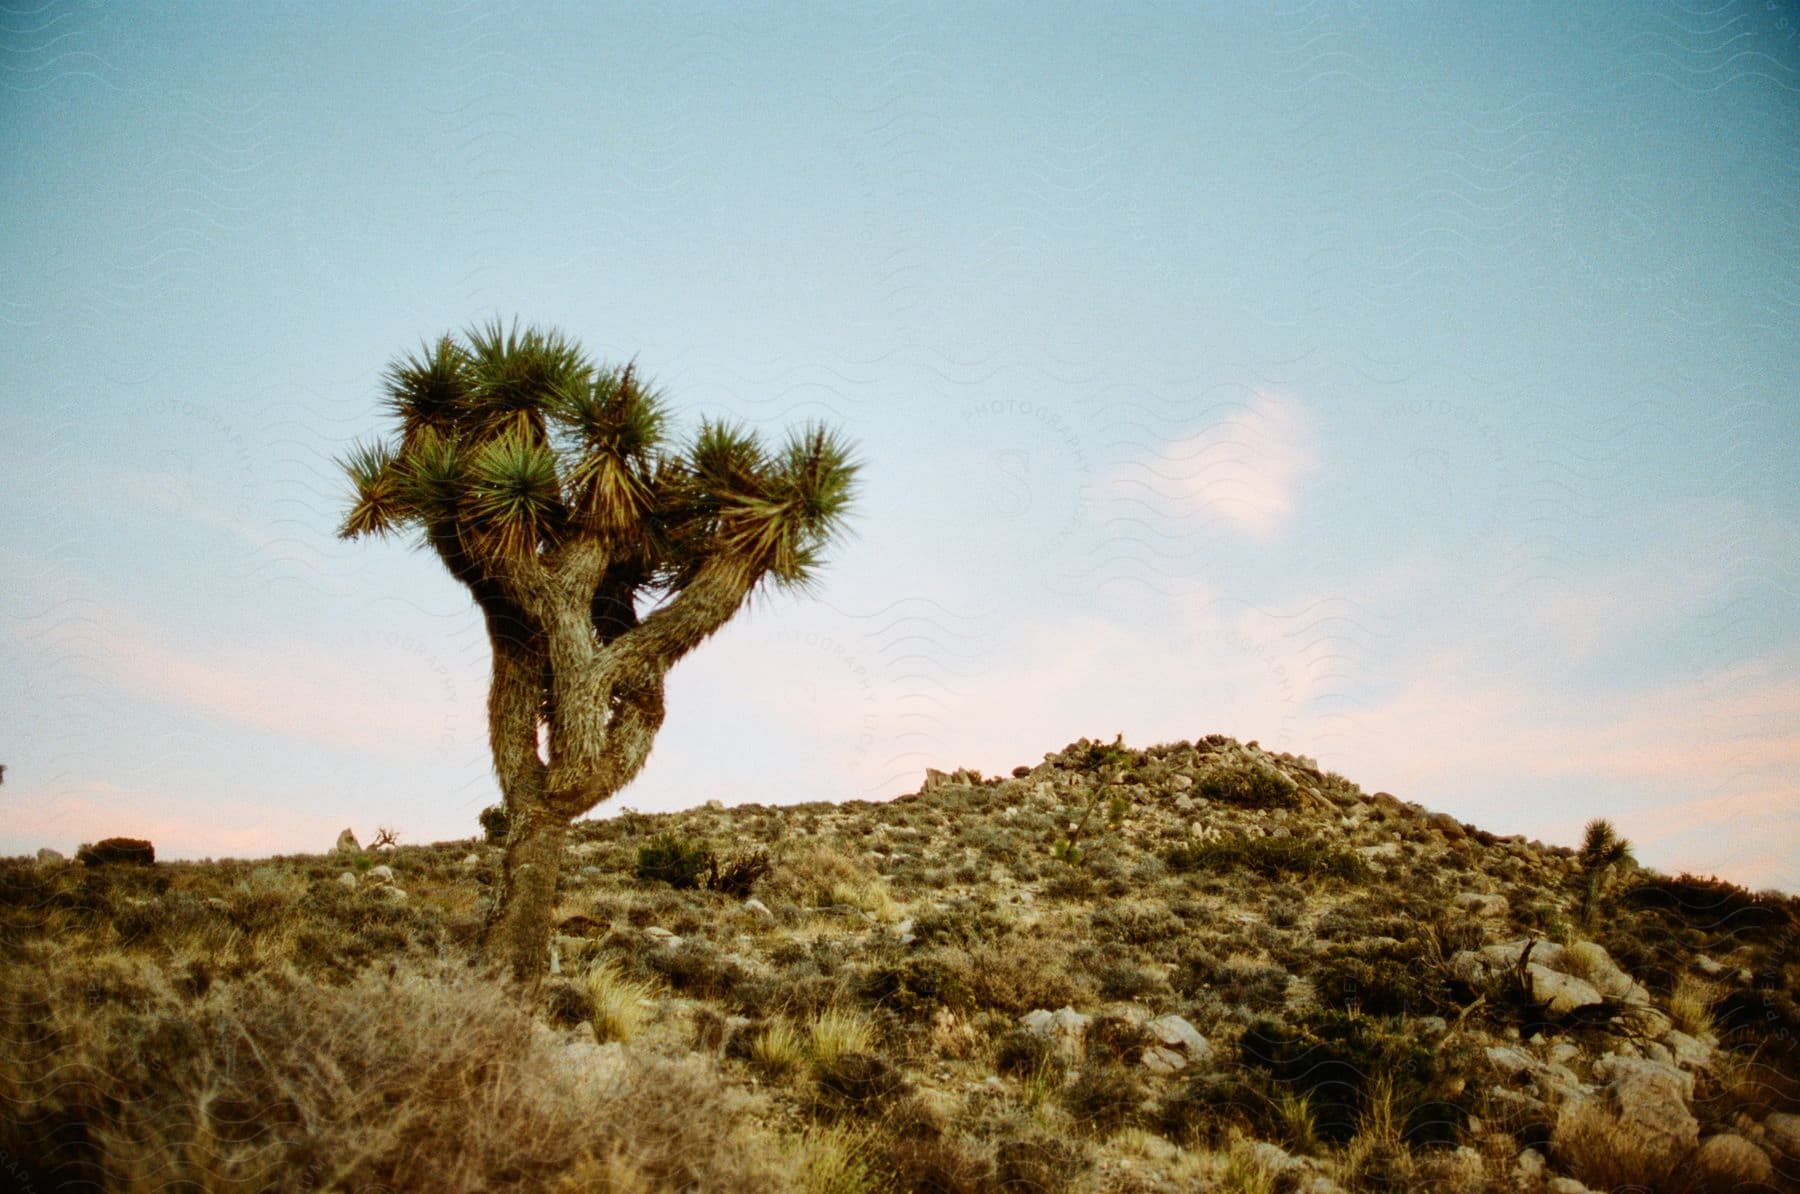 A lone Joshua tree stands in a desert landscape against a soft pastel sky.